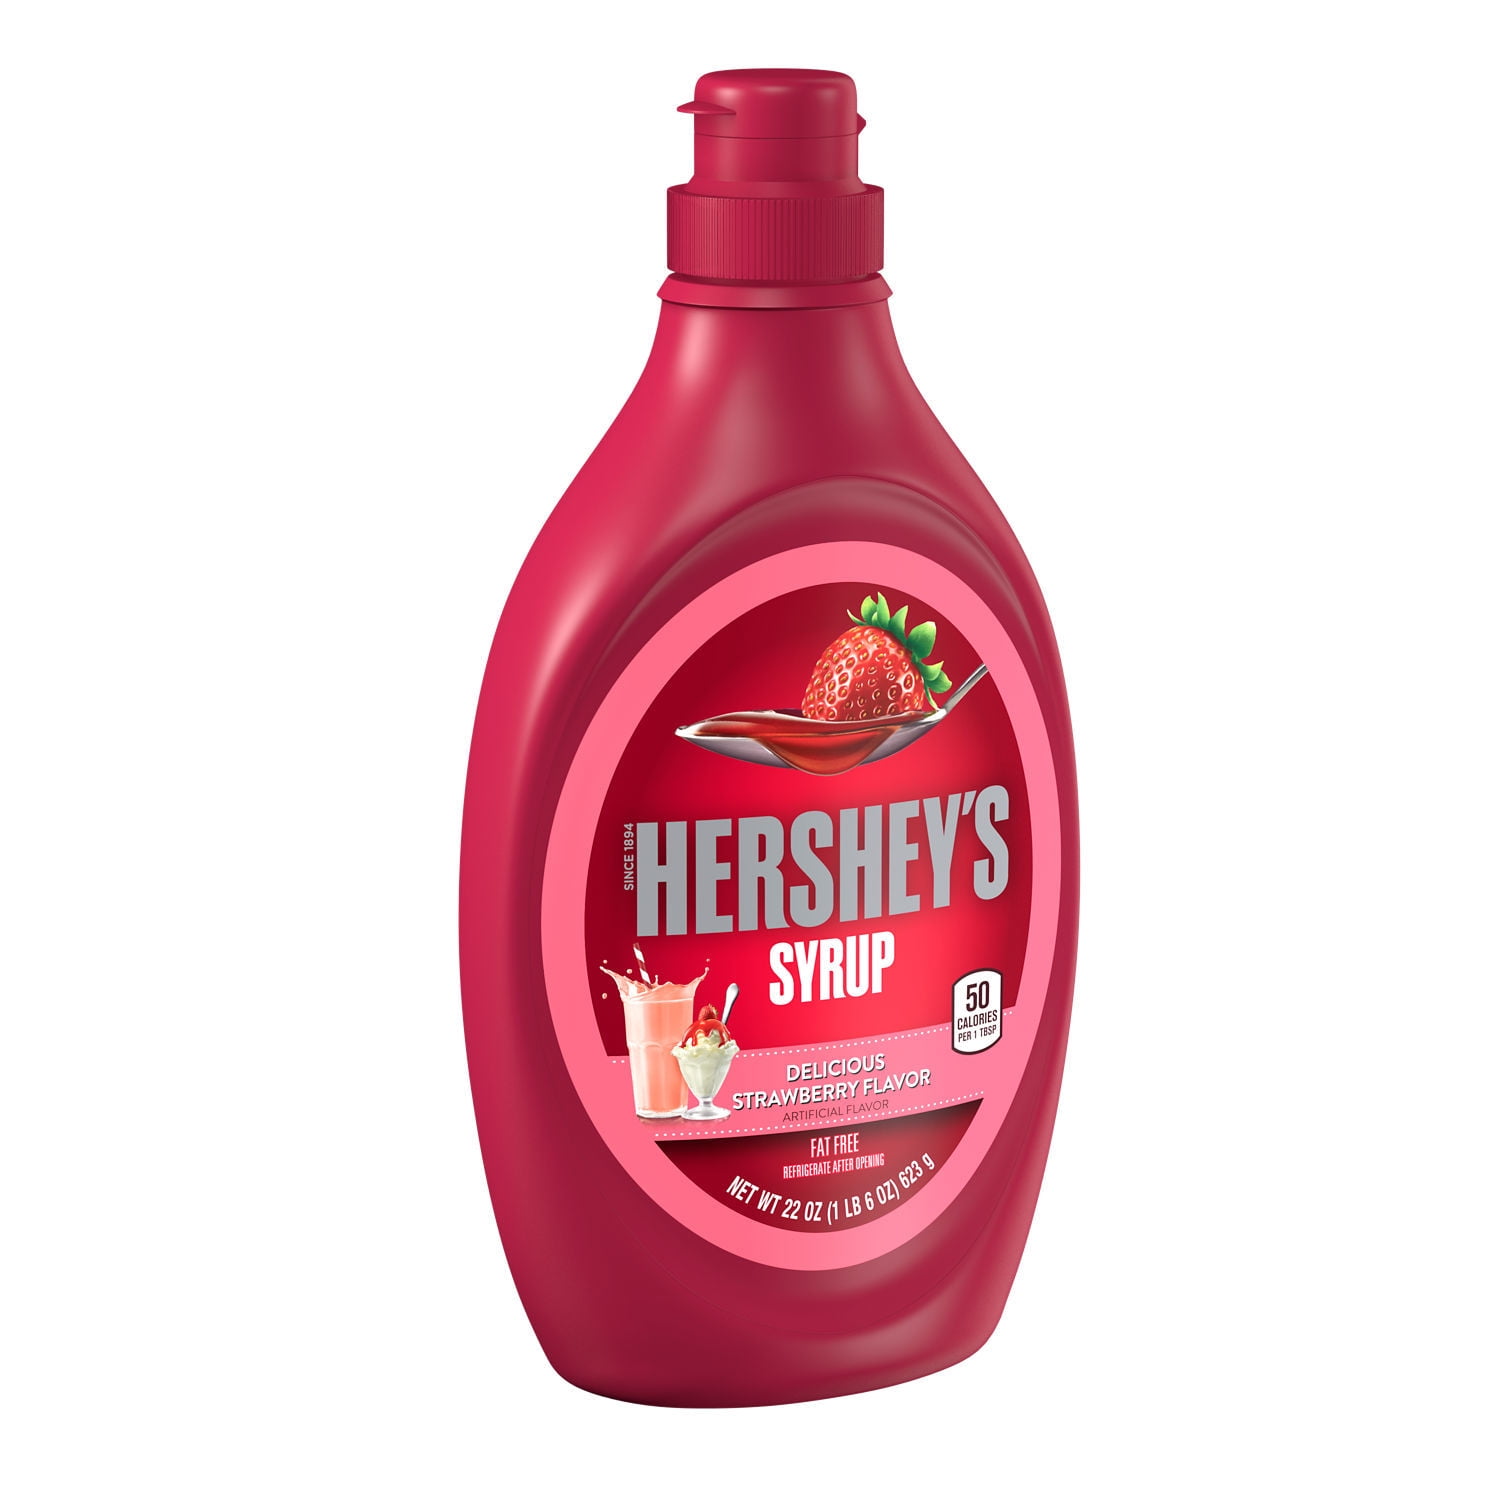 HERSHEY'S Strawberry Flavored Syrup Fat and Gluten Free, 22 oz Bottle